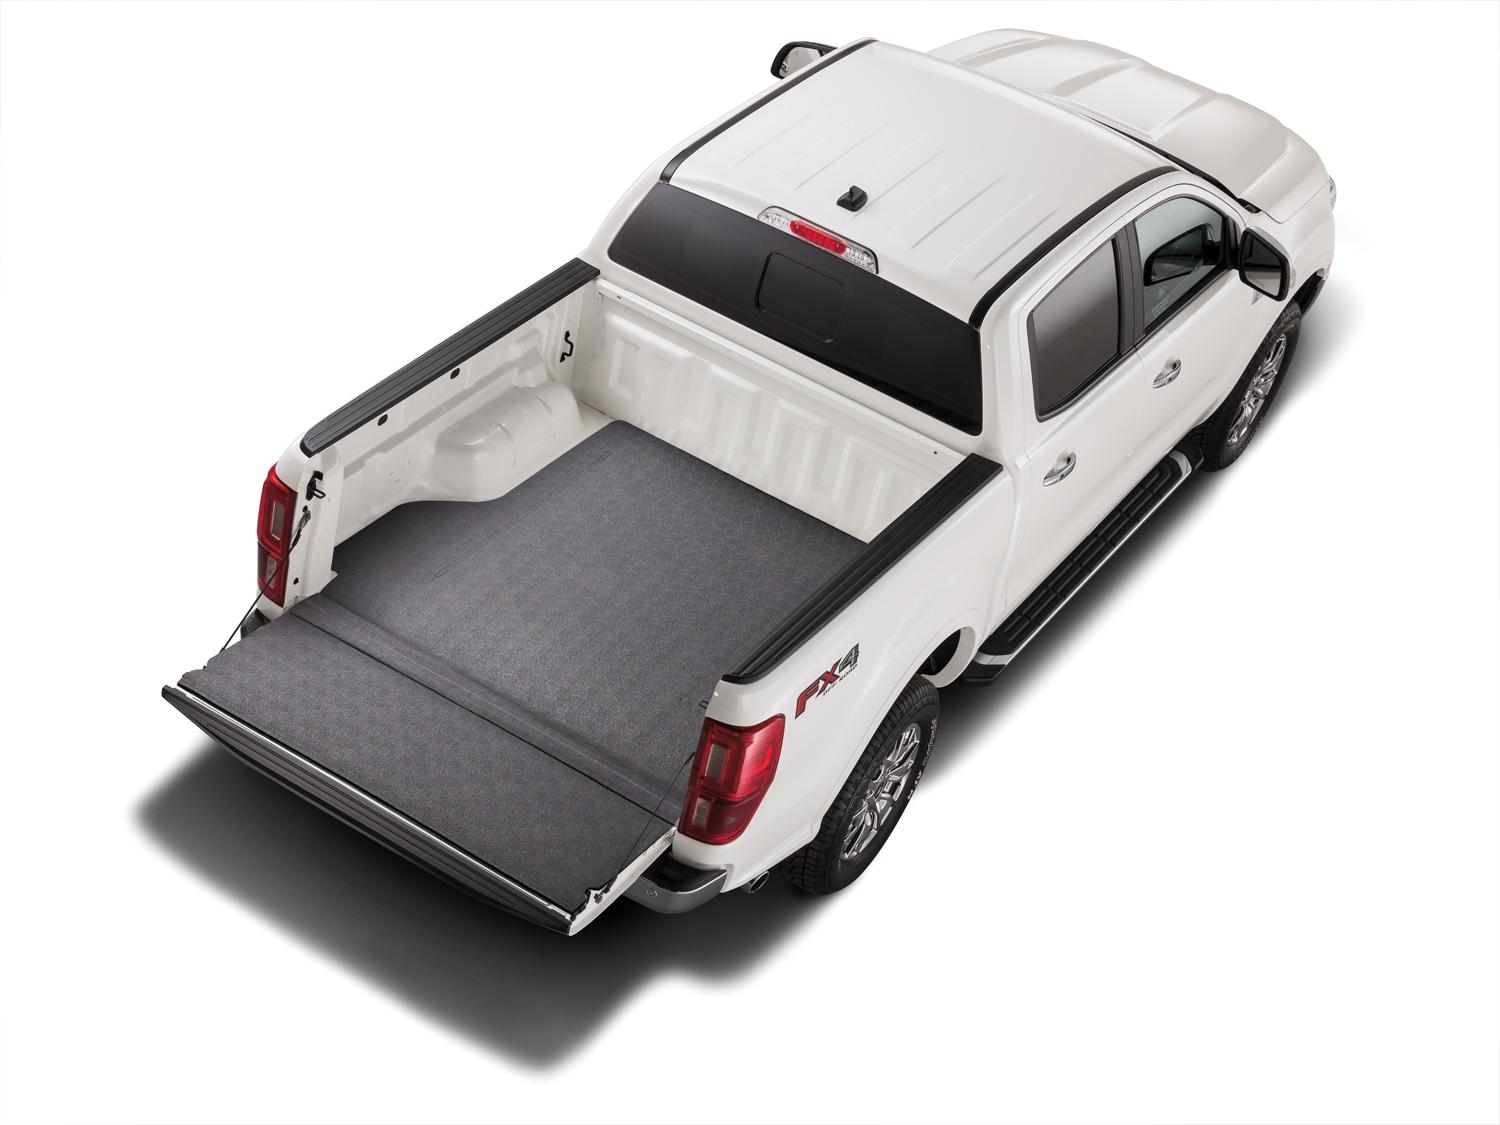 Image for Bed Mat - Impact, Heavy-Duty For 6.0 Bed from AccessoriesCanada